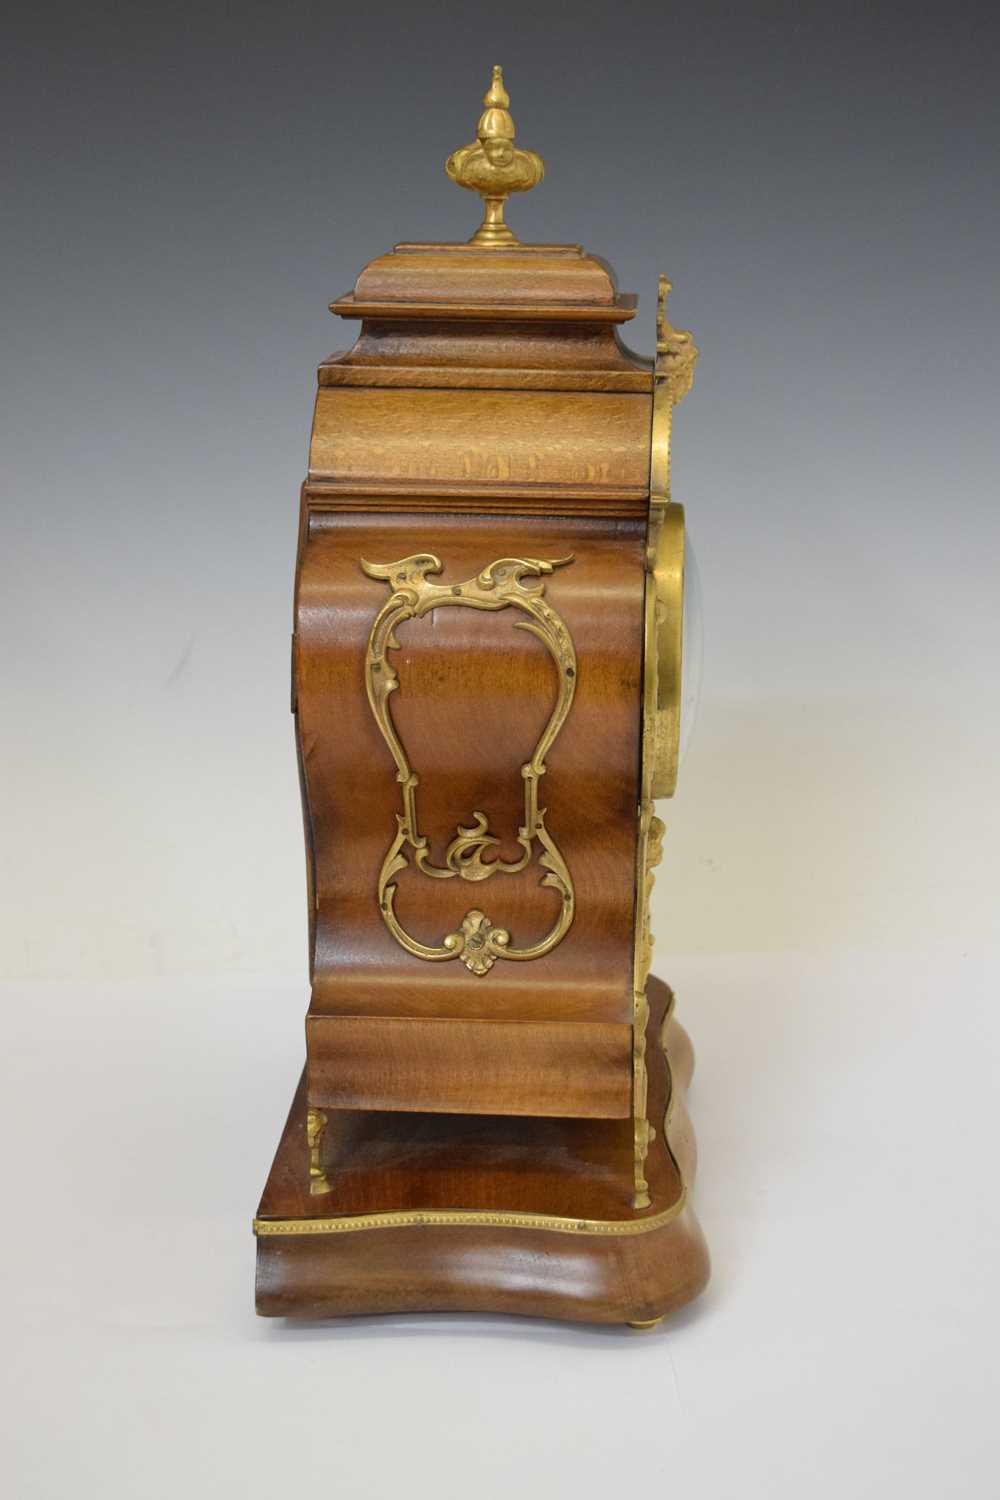 Early 20th century Lenzkirch French-style mantel clock - Image 5 of 11